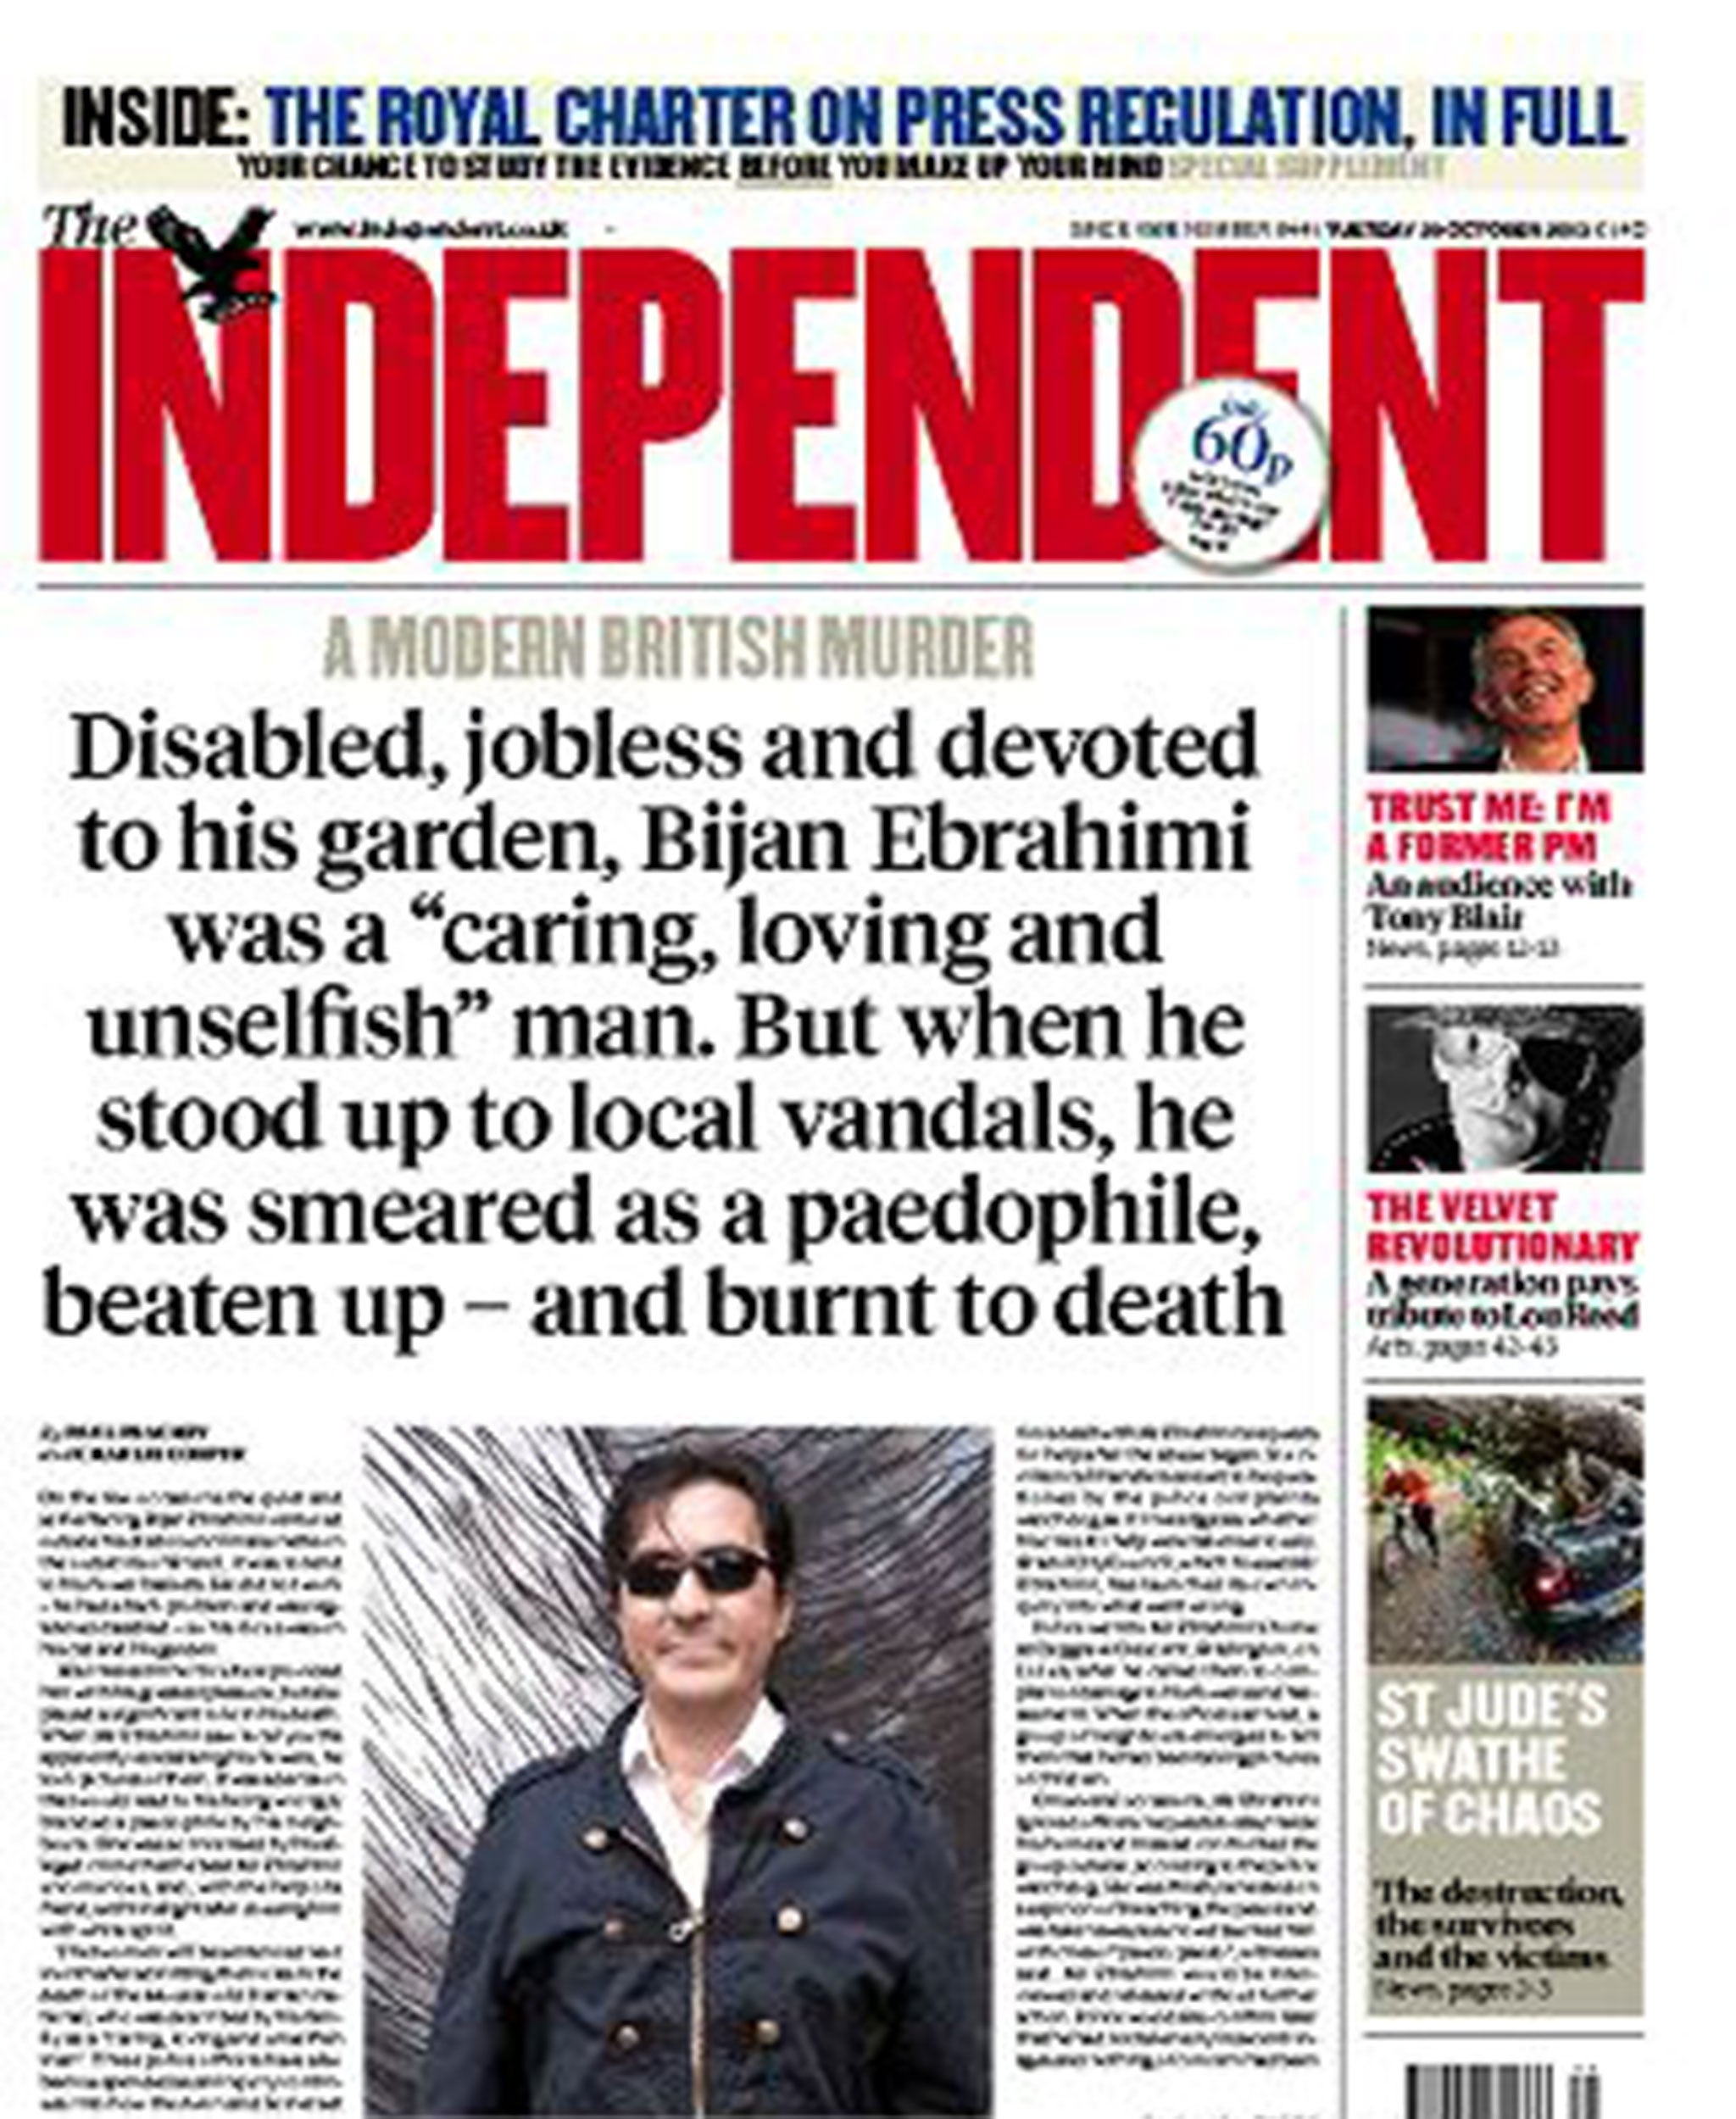 The Independent from 29 October 2013 reporting his murder